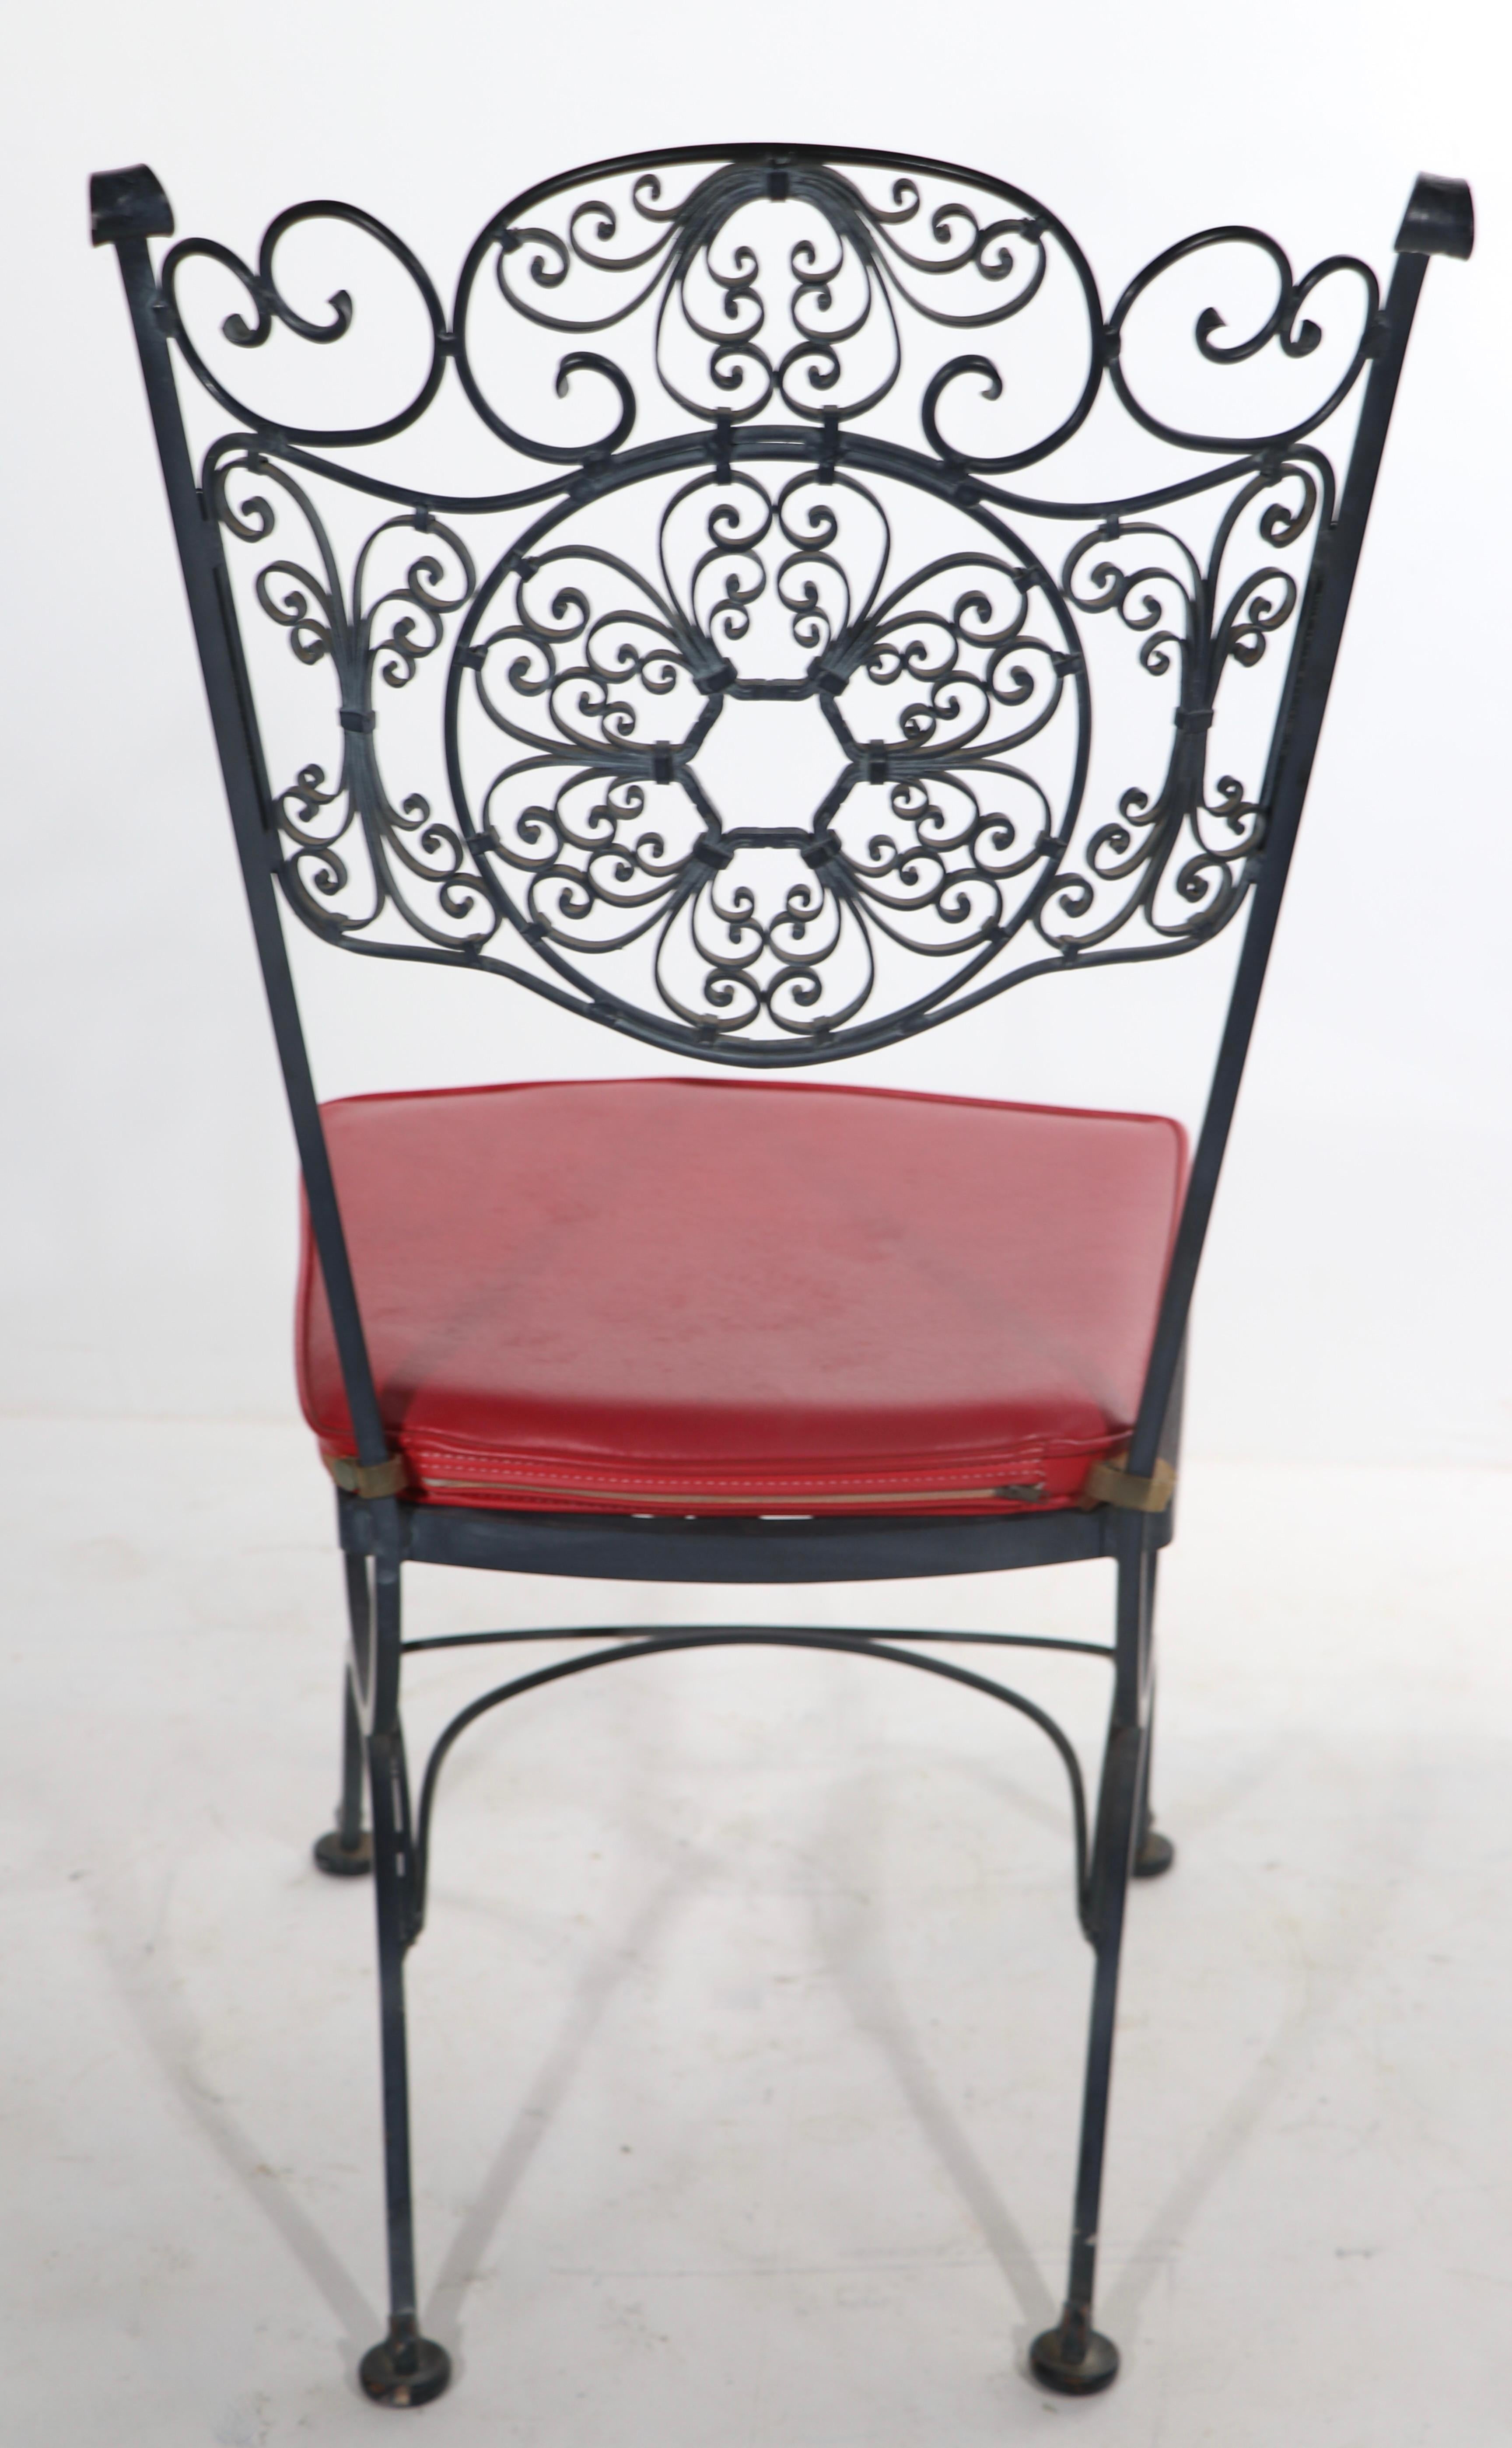 20th Century Pr. Ornate Wrought Iron Patio Garden Dining Chairs by Lee Woodard For Sale